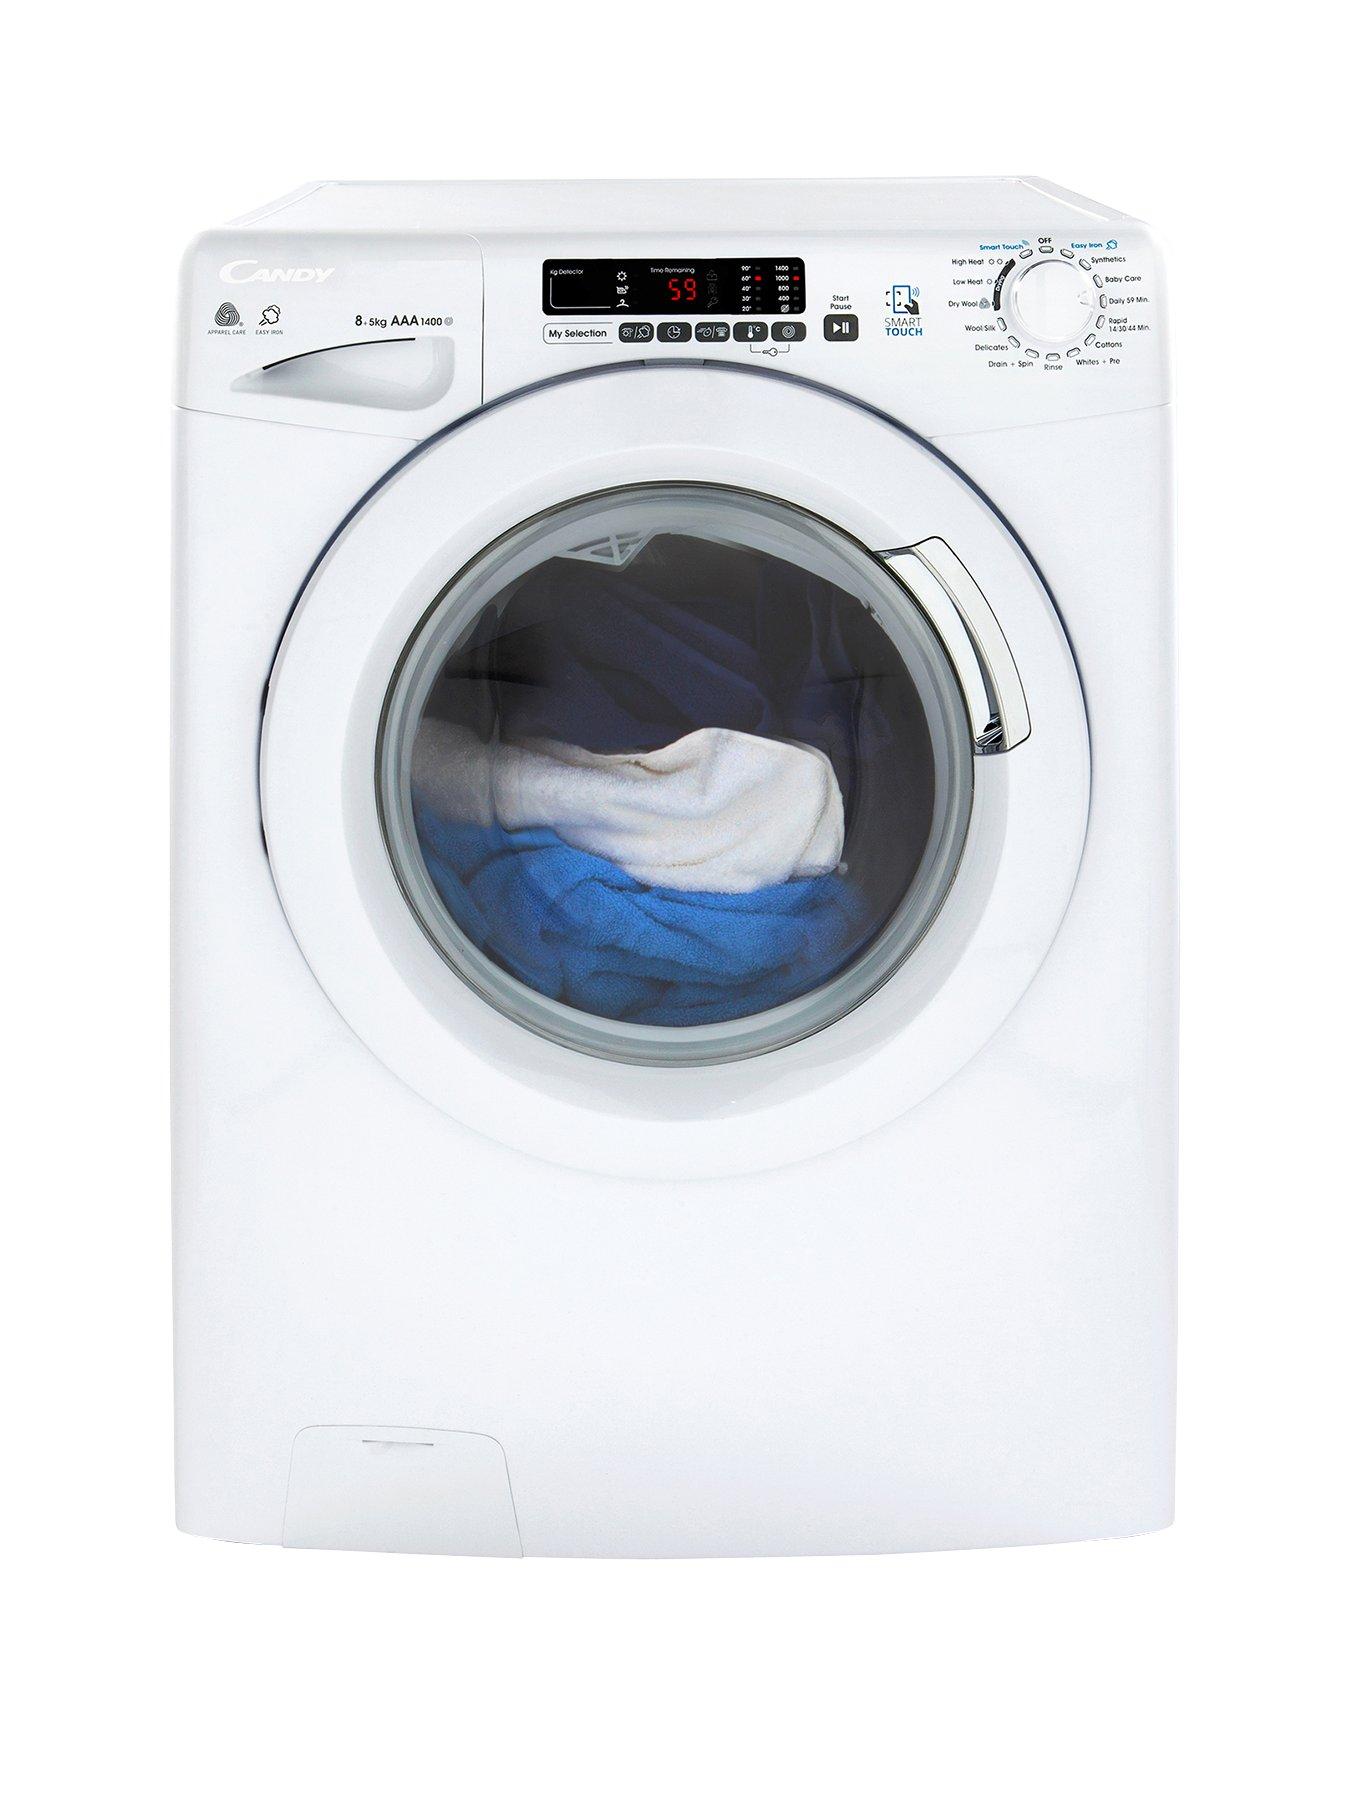 Candy Gvsw485Dc 8Kg Wash, 5Kg Dry, 1400 Spin Washer Dryer With Smart Touch – White